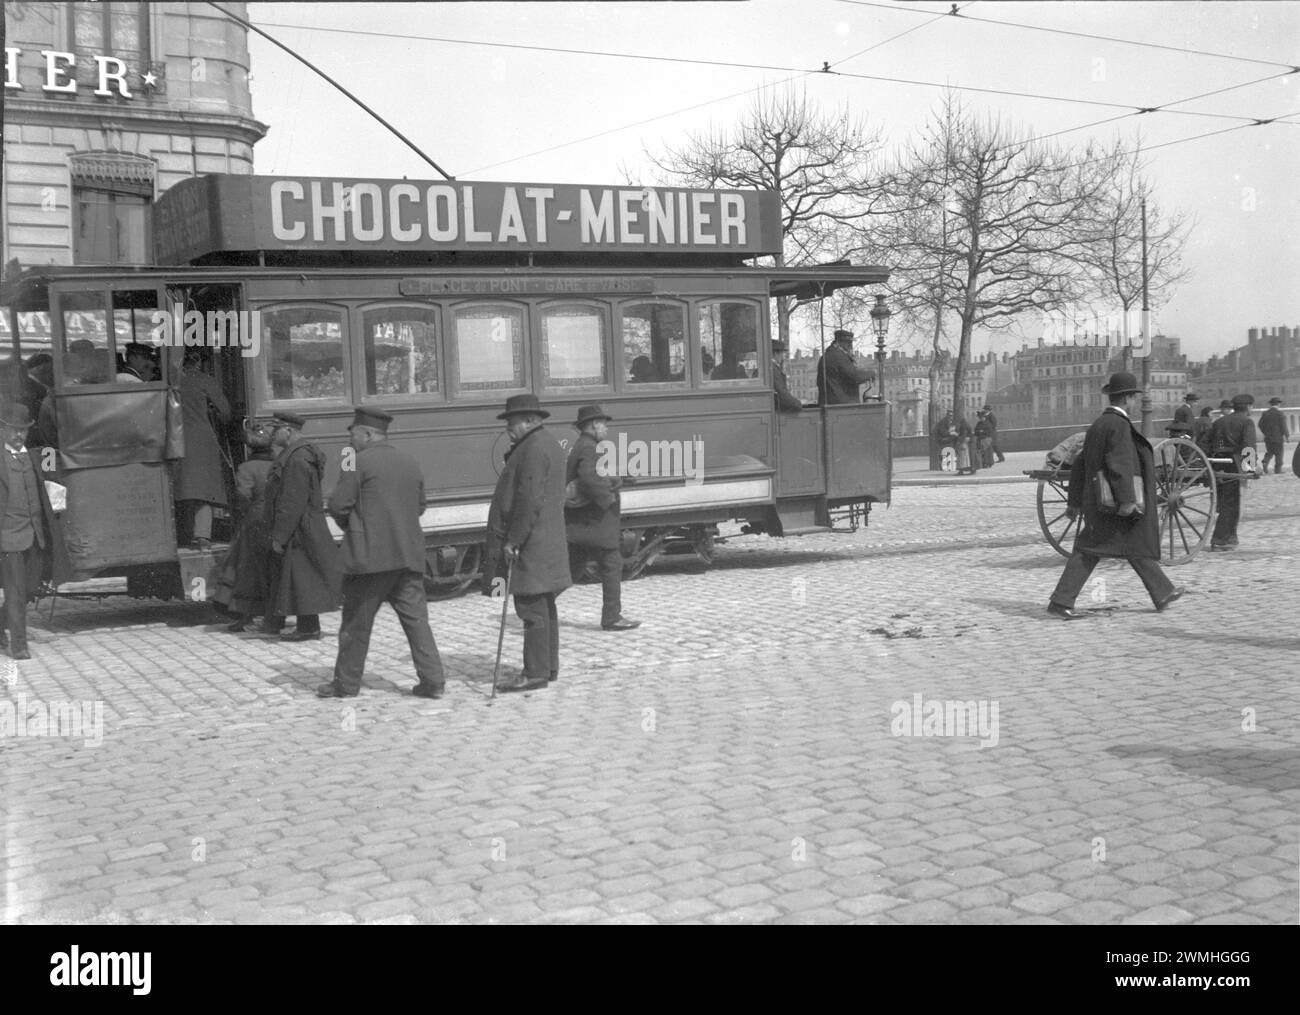 People walking in a paved street in Lyon. Next to a tramway with publicities. Beginning of 20th century. Old photograph digitized from glass plate Stock Photo